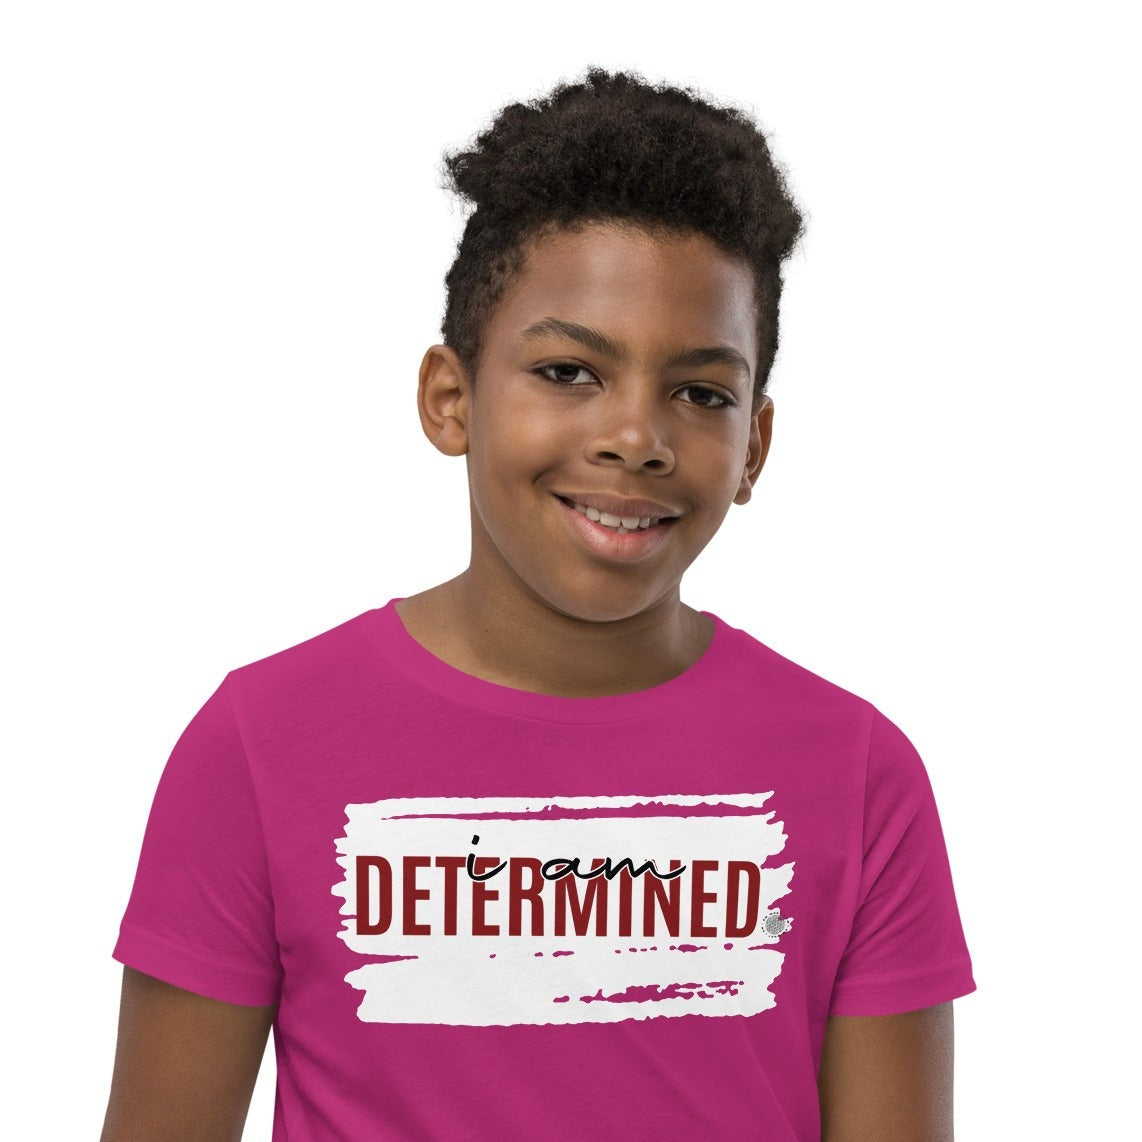 Our ‘I Am Determined’ affirmation youth t-shirt describes your son or daughter who is set on creating the best erupting volcano science project ever. Your child has no limits. Positive thinking can build their confidence.